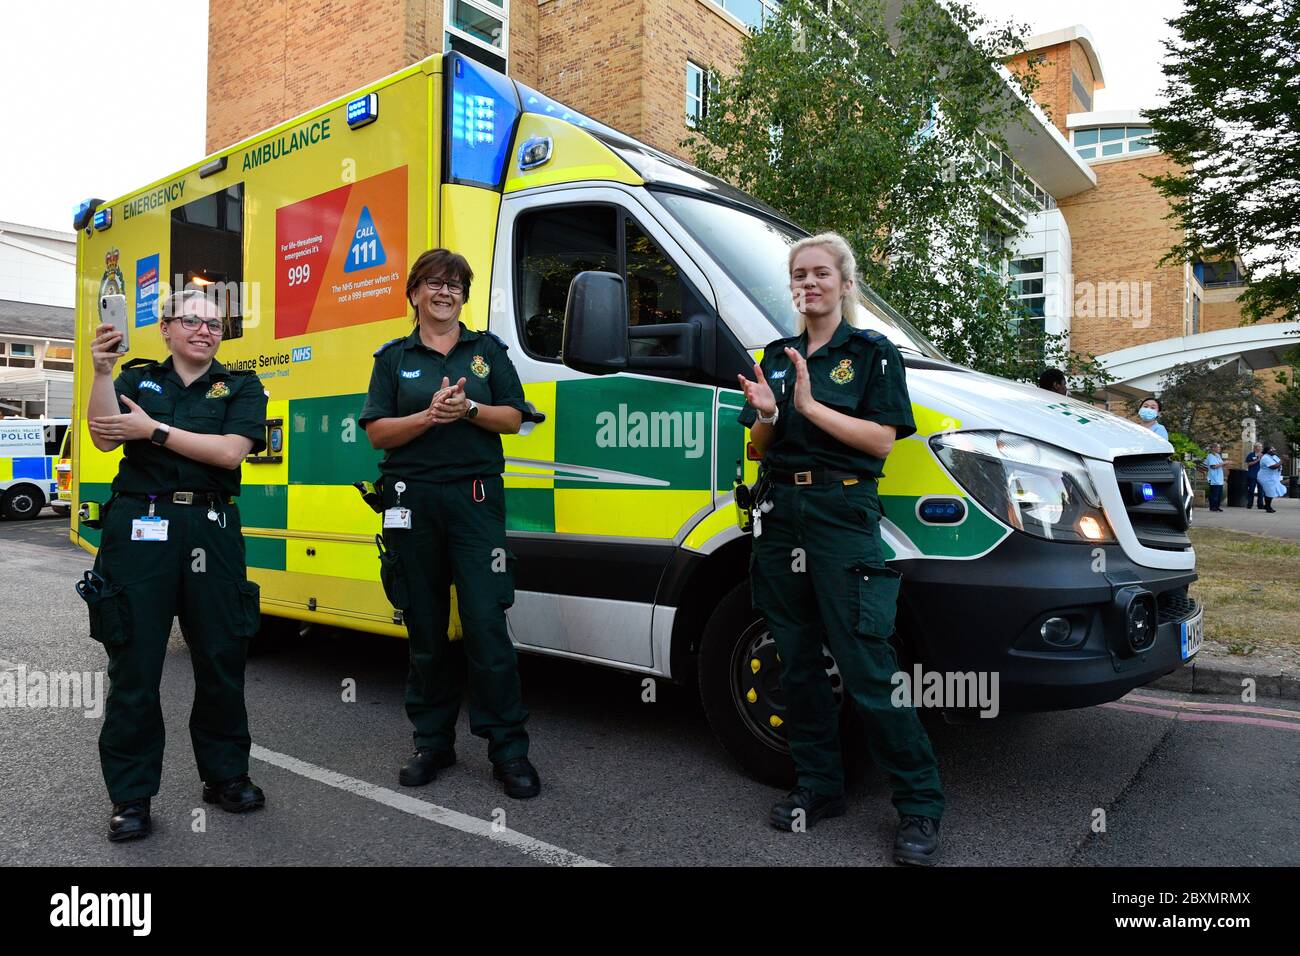 Ambulance workers clapping support at Thursday 8pm clap for carers during Coronavirus lockdown, Royal Berkshire Hospital UK May 2020 Stock Photo